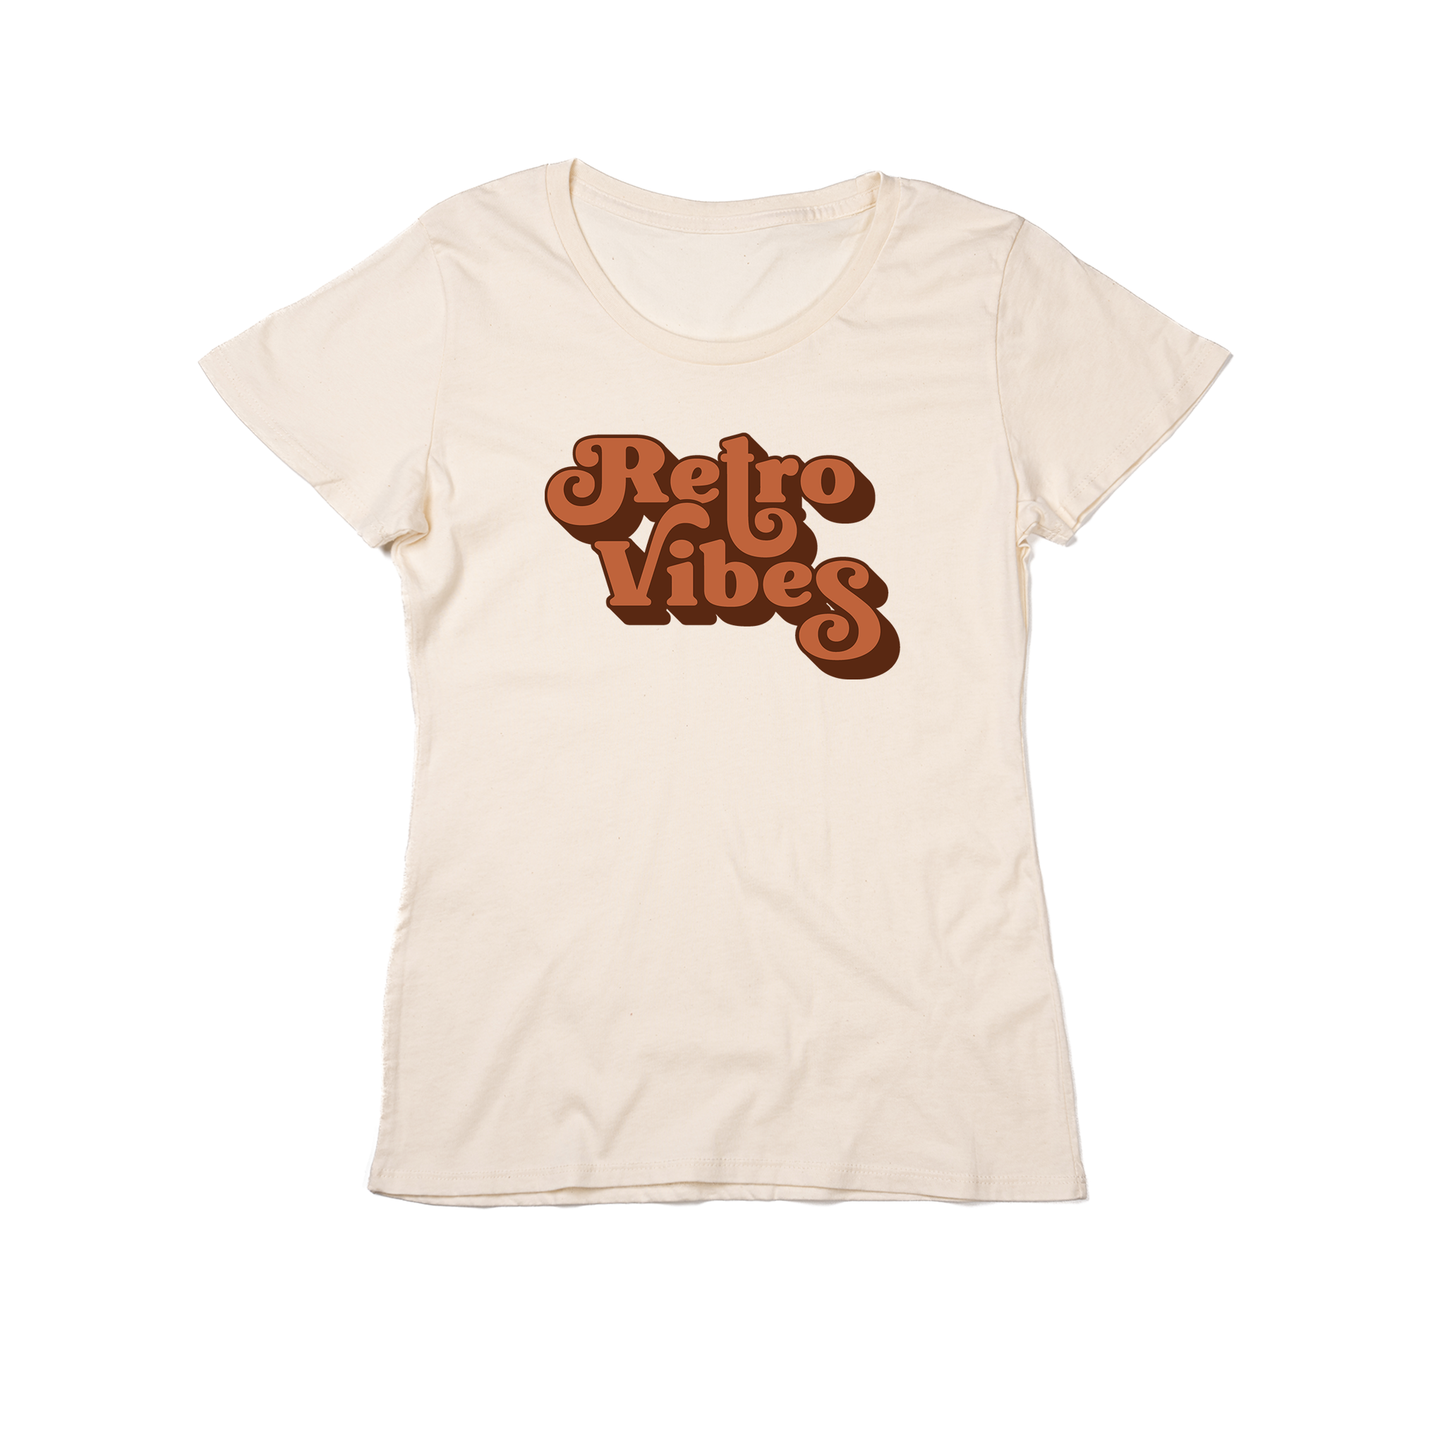 Retro Vibes (Vintage) - Women's Fitted Tee (Natural)